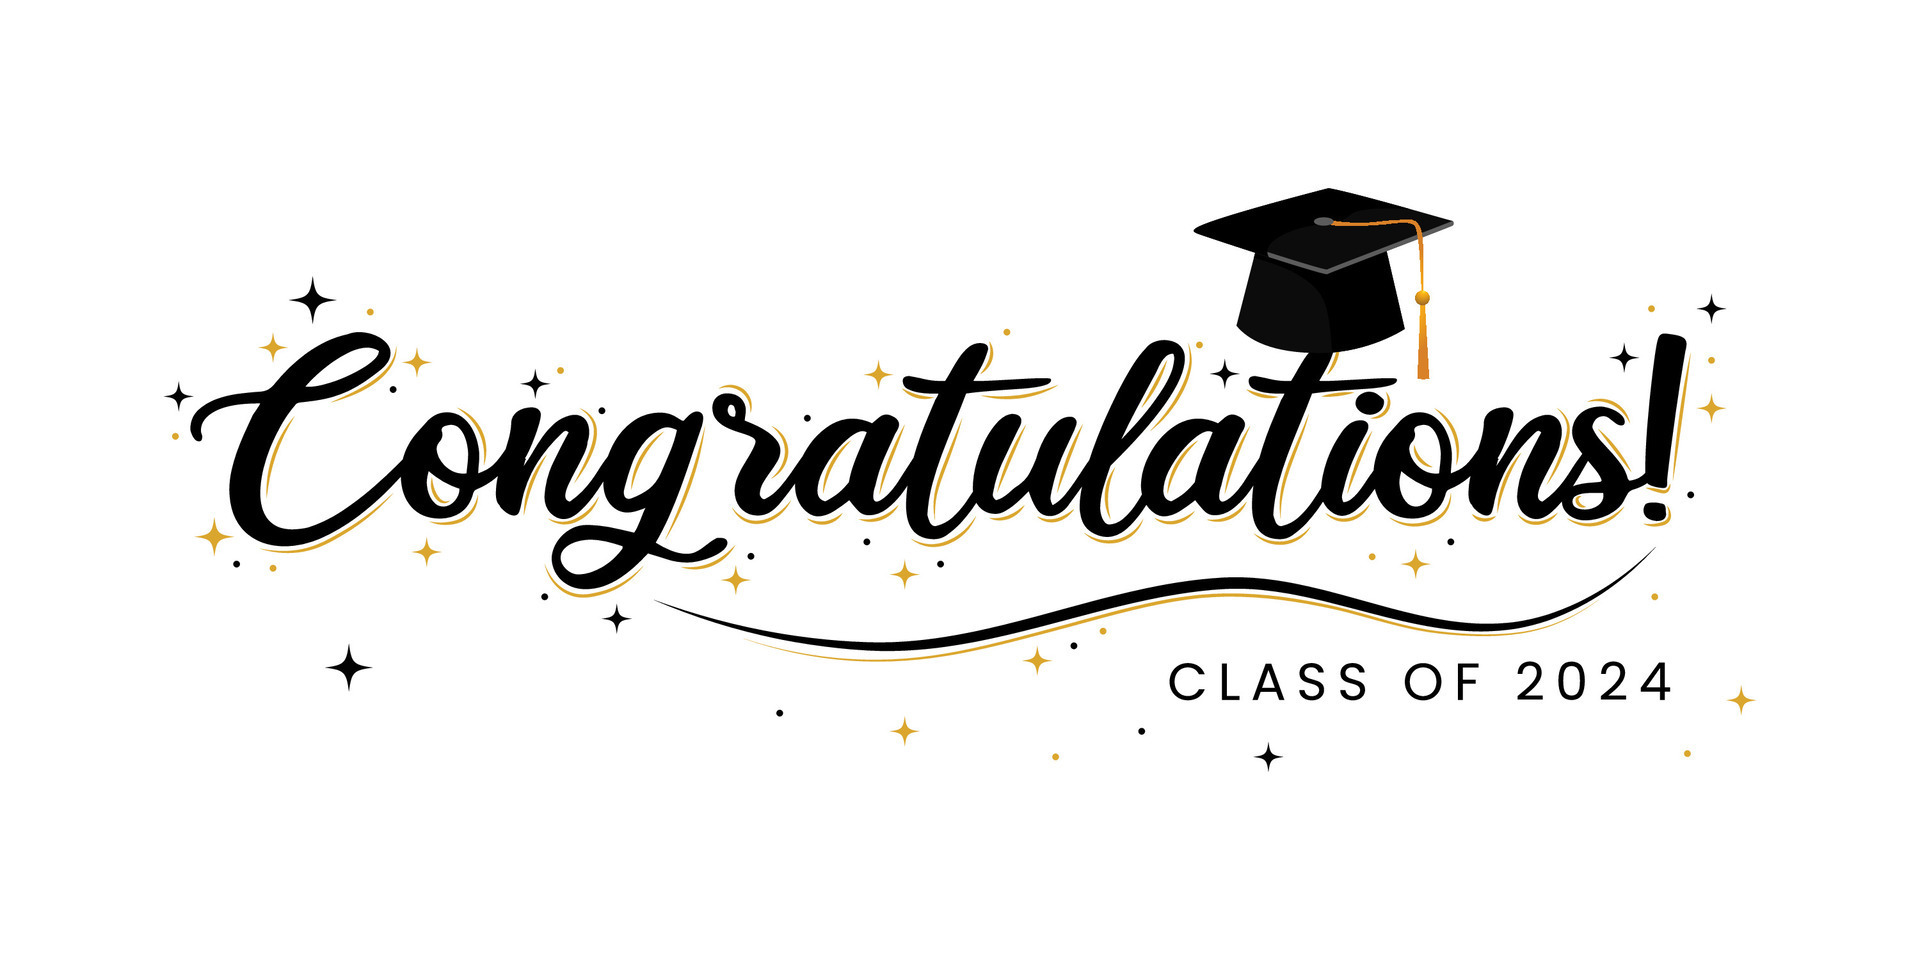 Congratulation Text For Graduation Class Of 2024 Vector, Class Of 2024,  Congratulation Graduation, 2024 PNG and Vector with Transparent Background  for Free Download